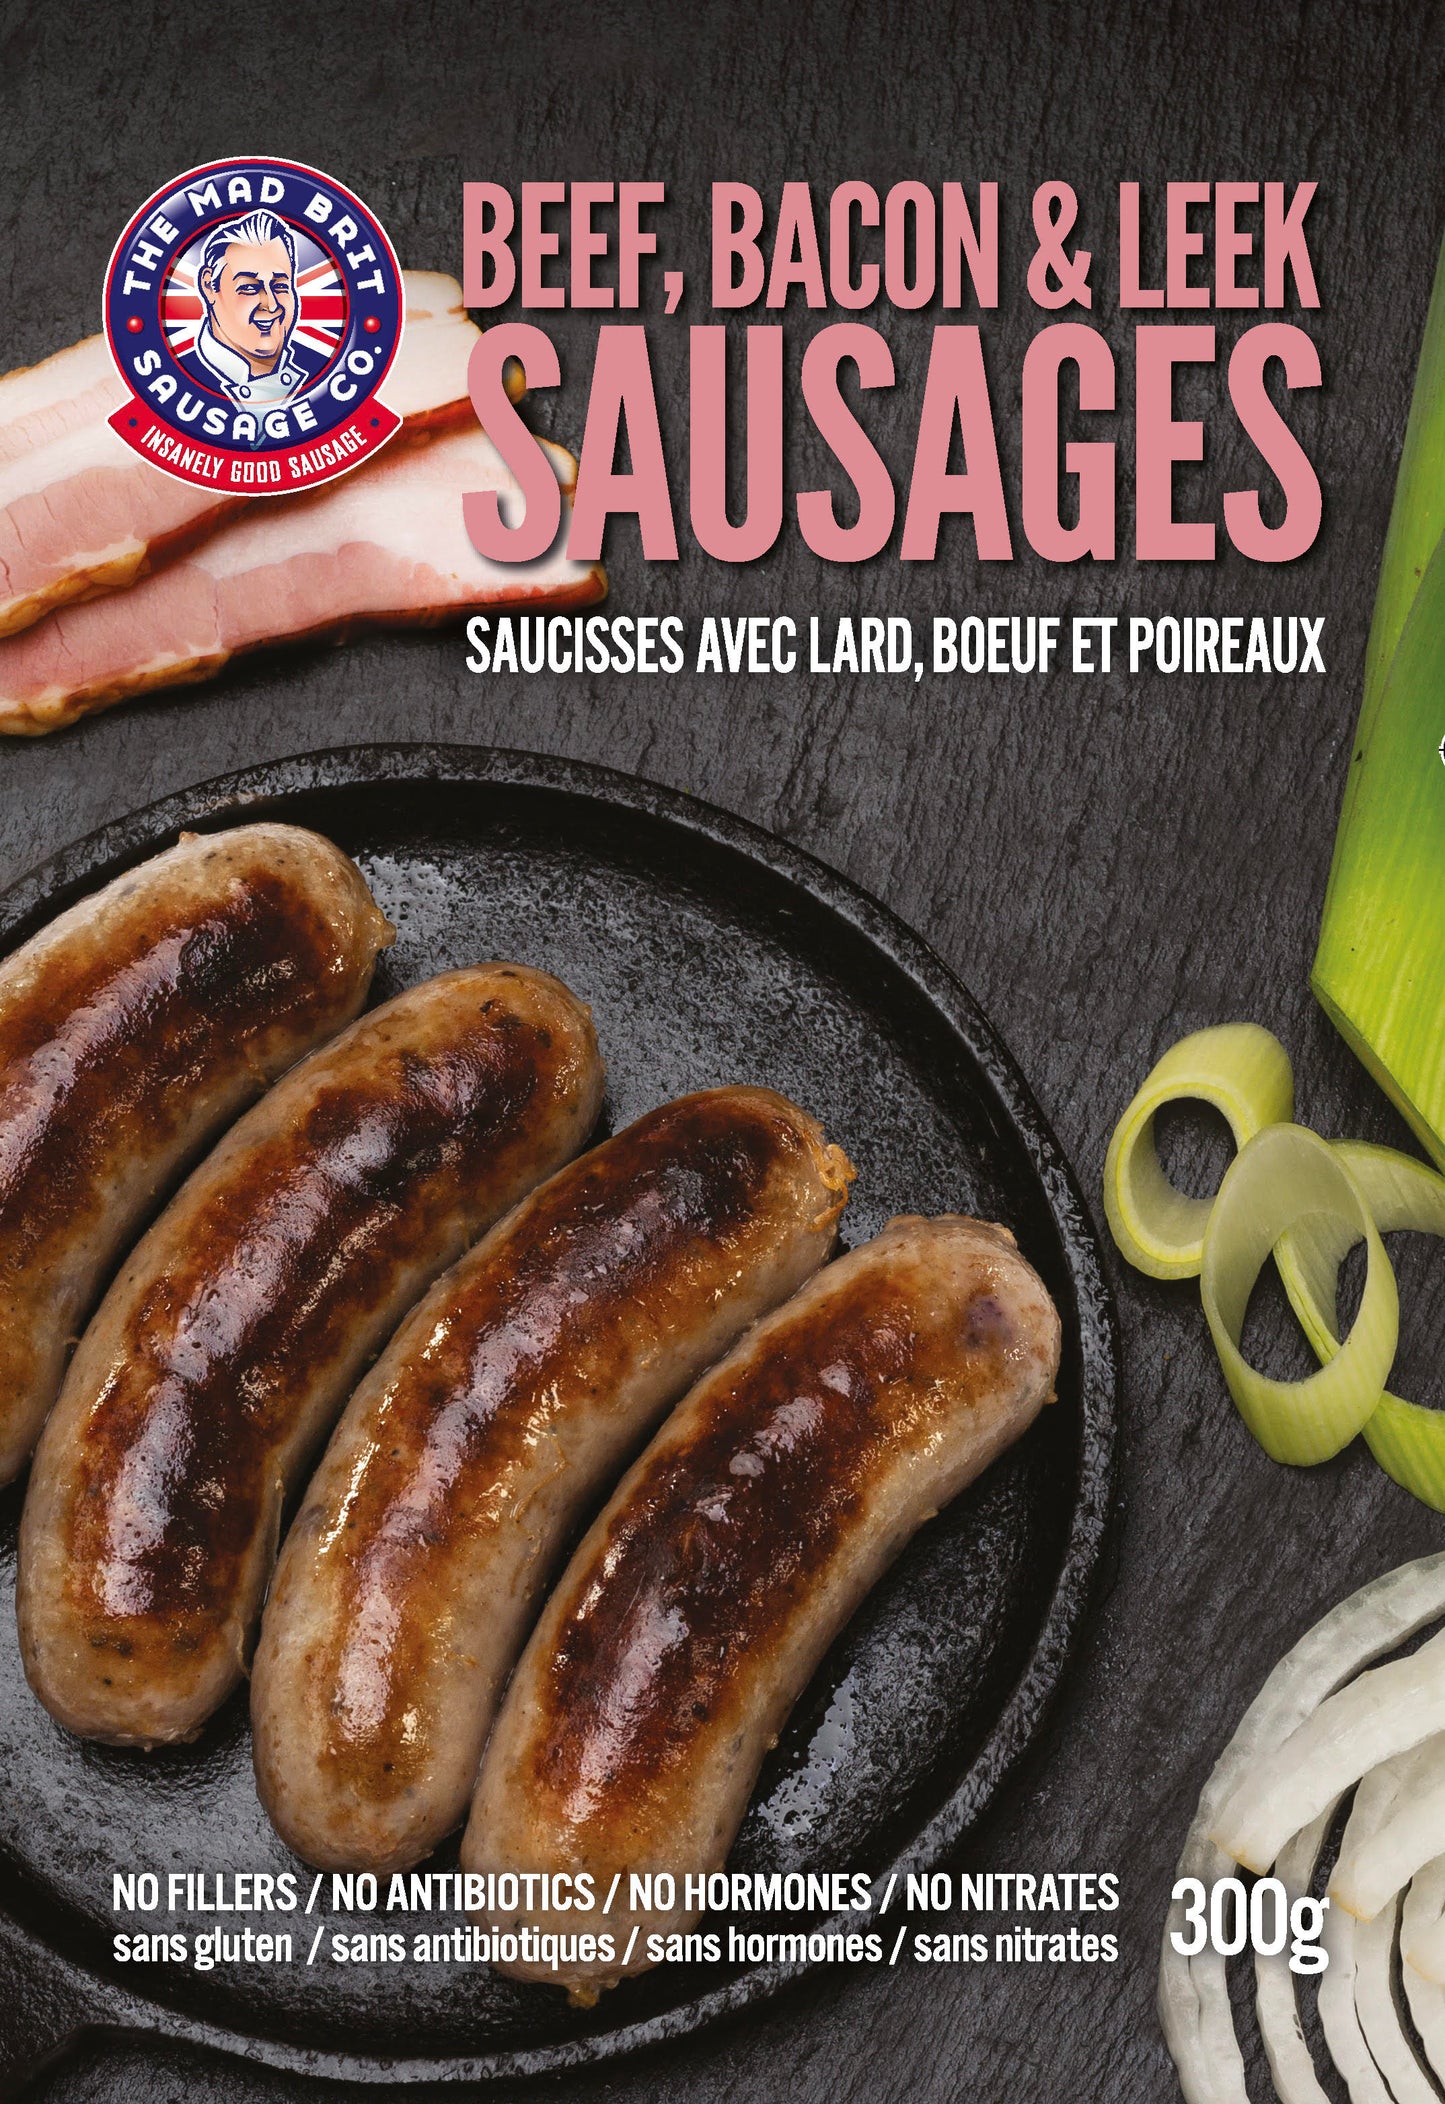 Mad Brit Sausage Co. - Beef. Bacon and Leek Sausages (Contains Pork)